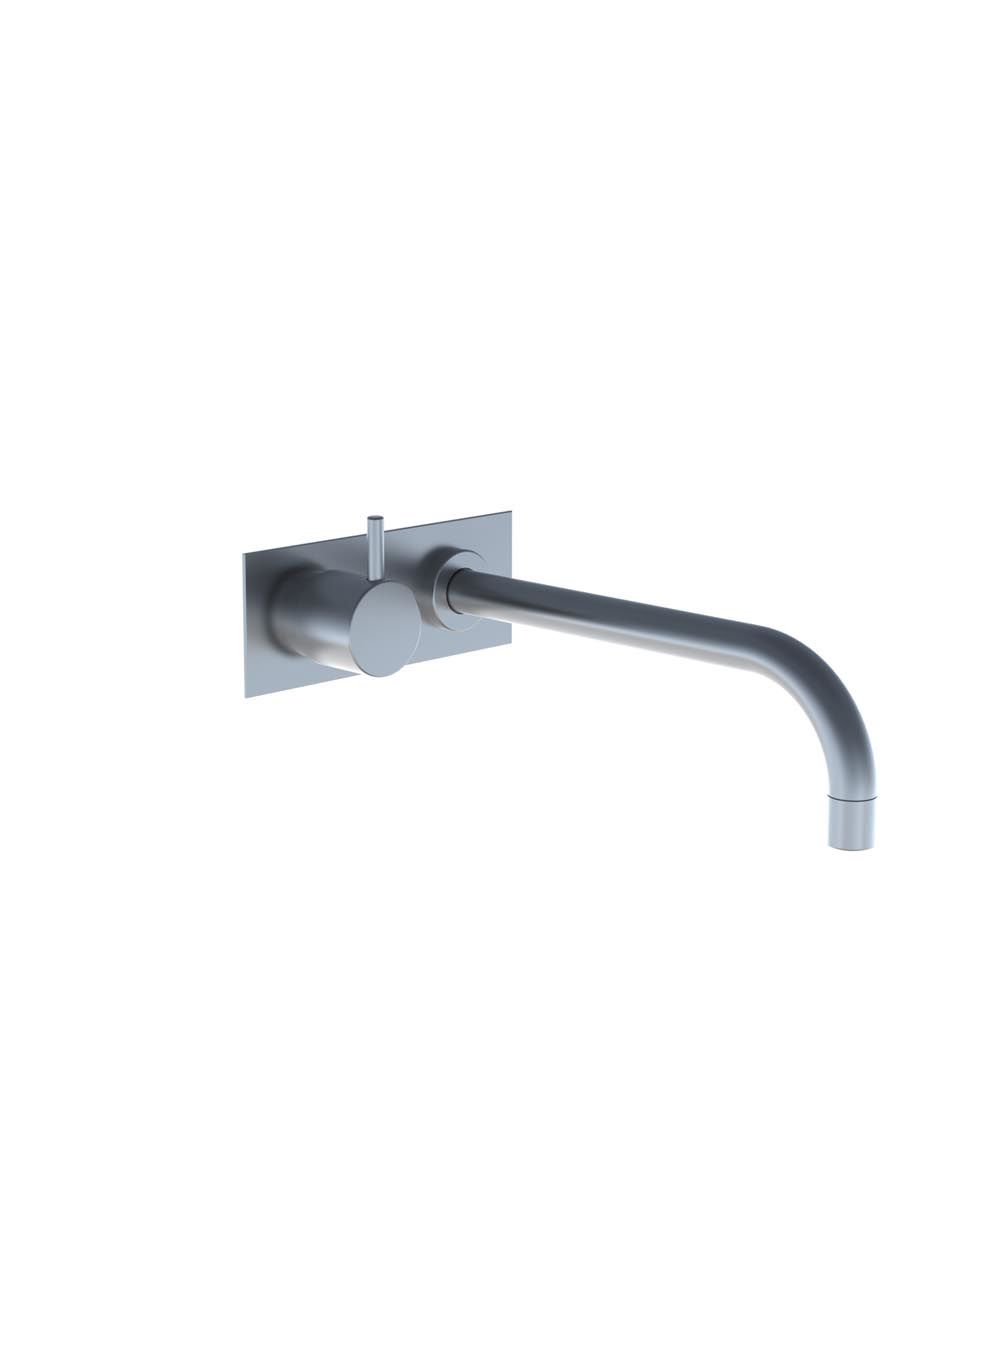 922: Build-in basin tap with ¼ turn ceramic disc technology.922UP = Valve 900.922AP = Handle NR17, 225 mm